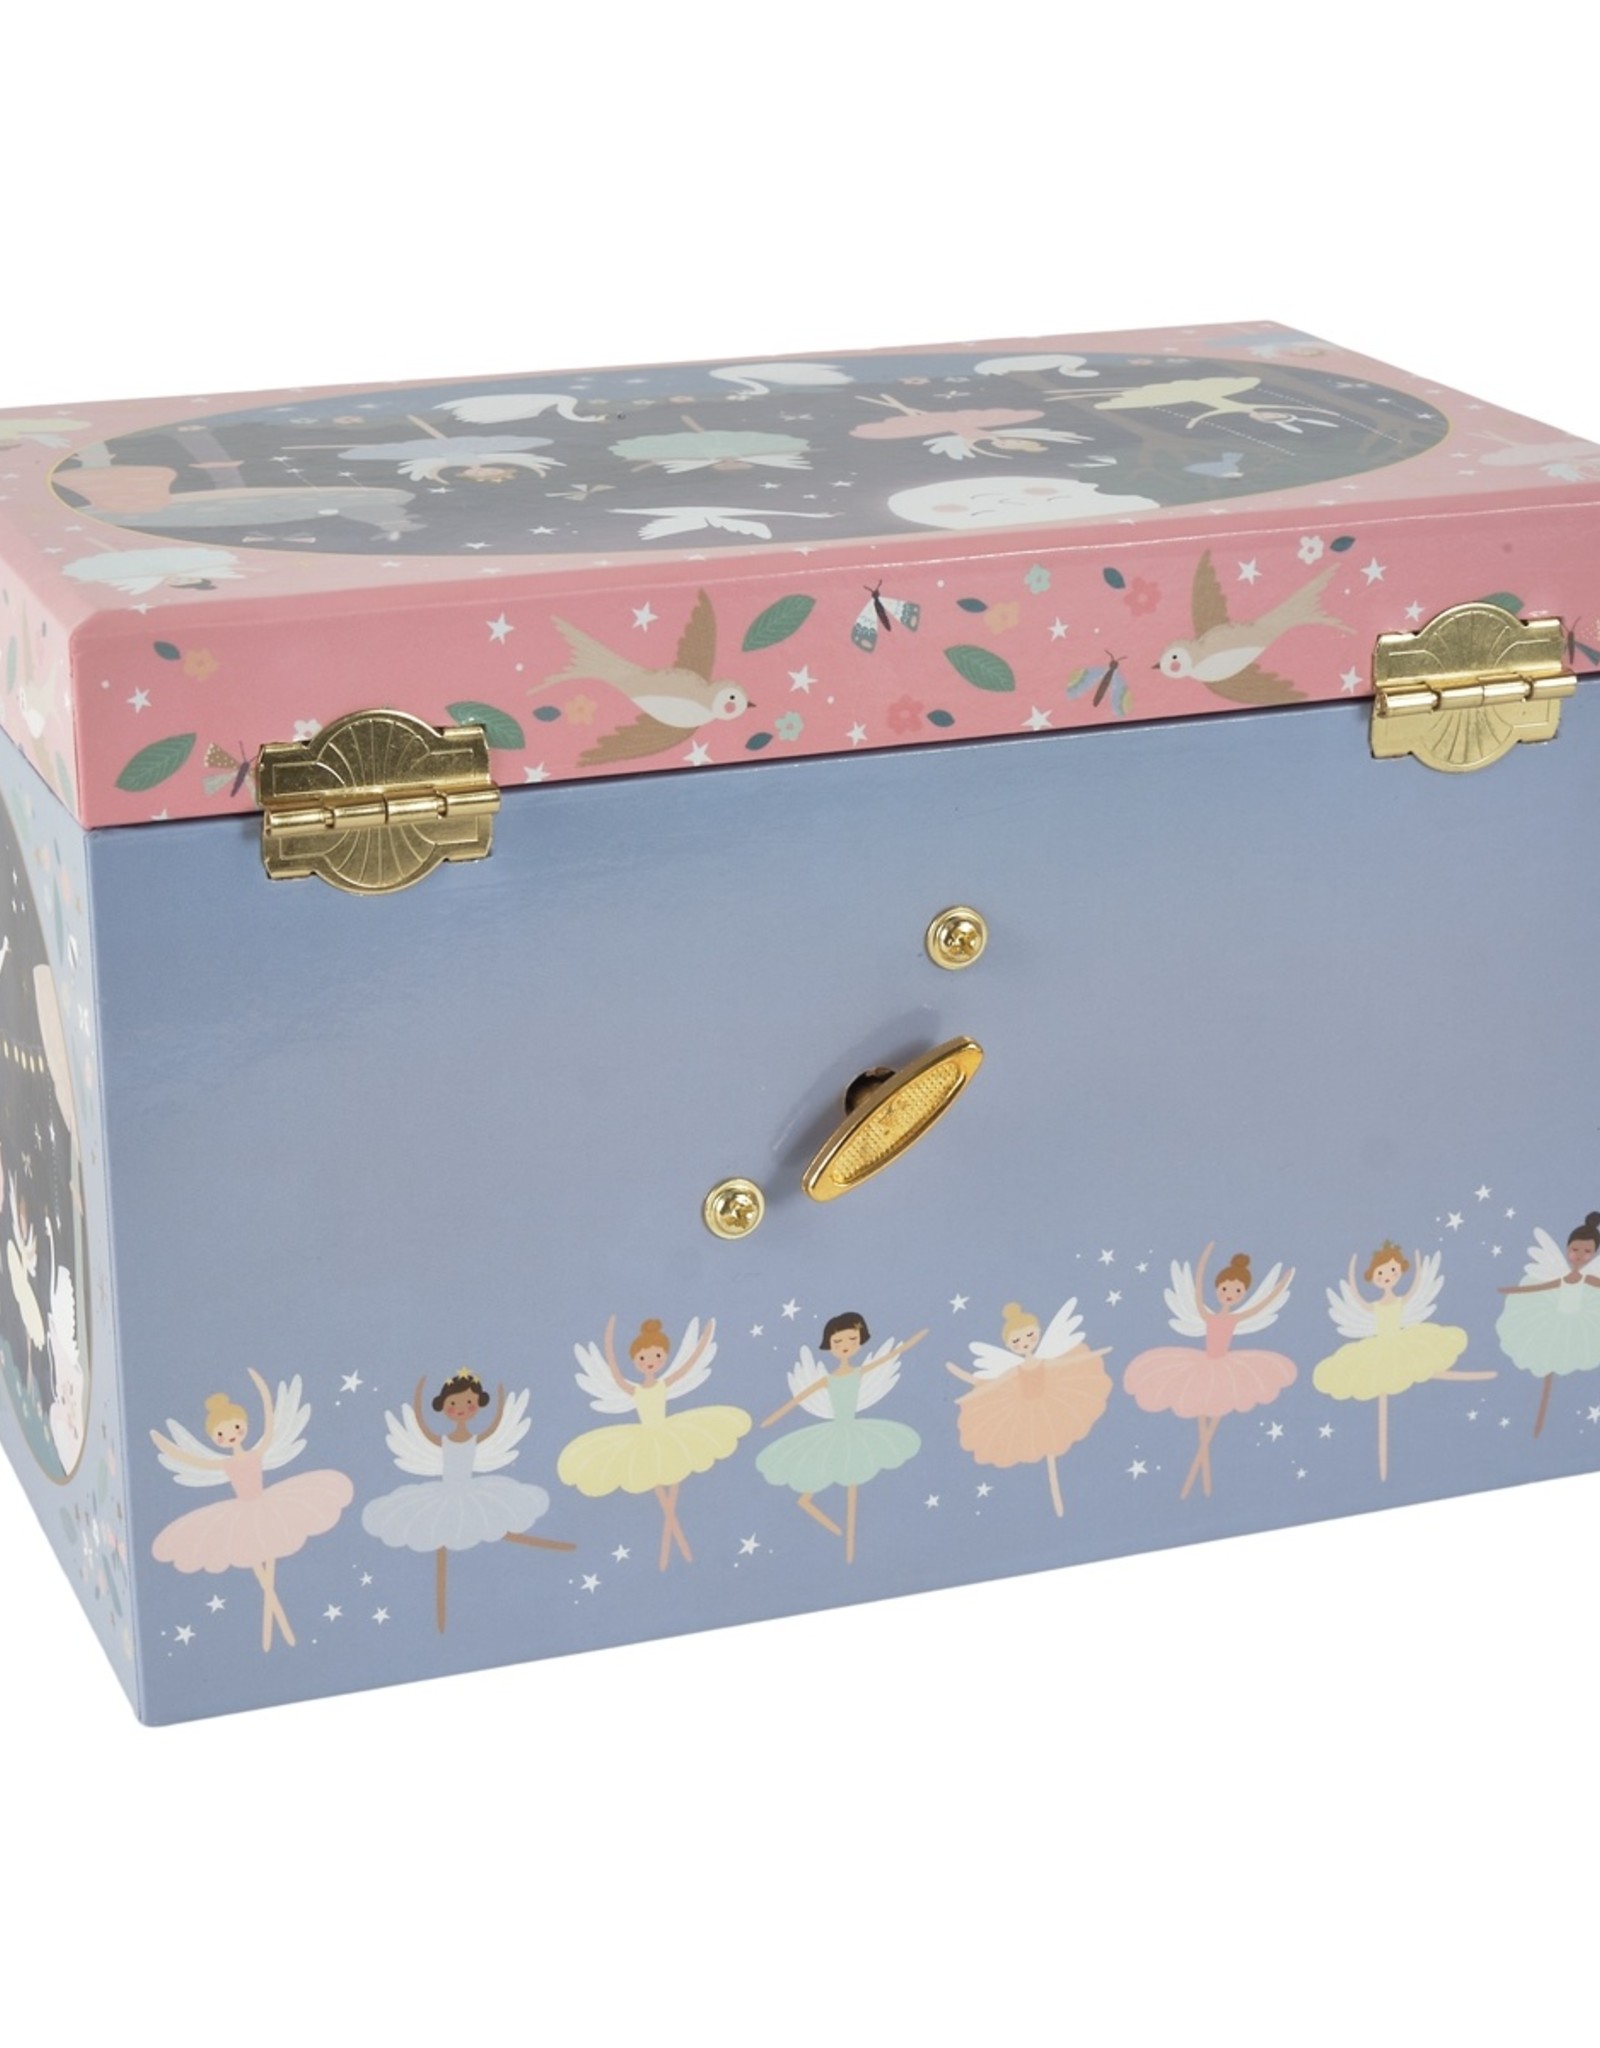 Floss and Rock Enchanted Musical Jewelry Box w/Drawers